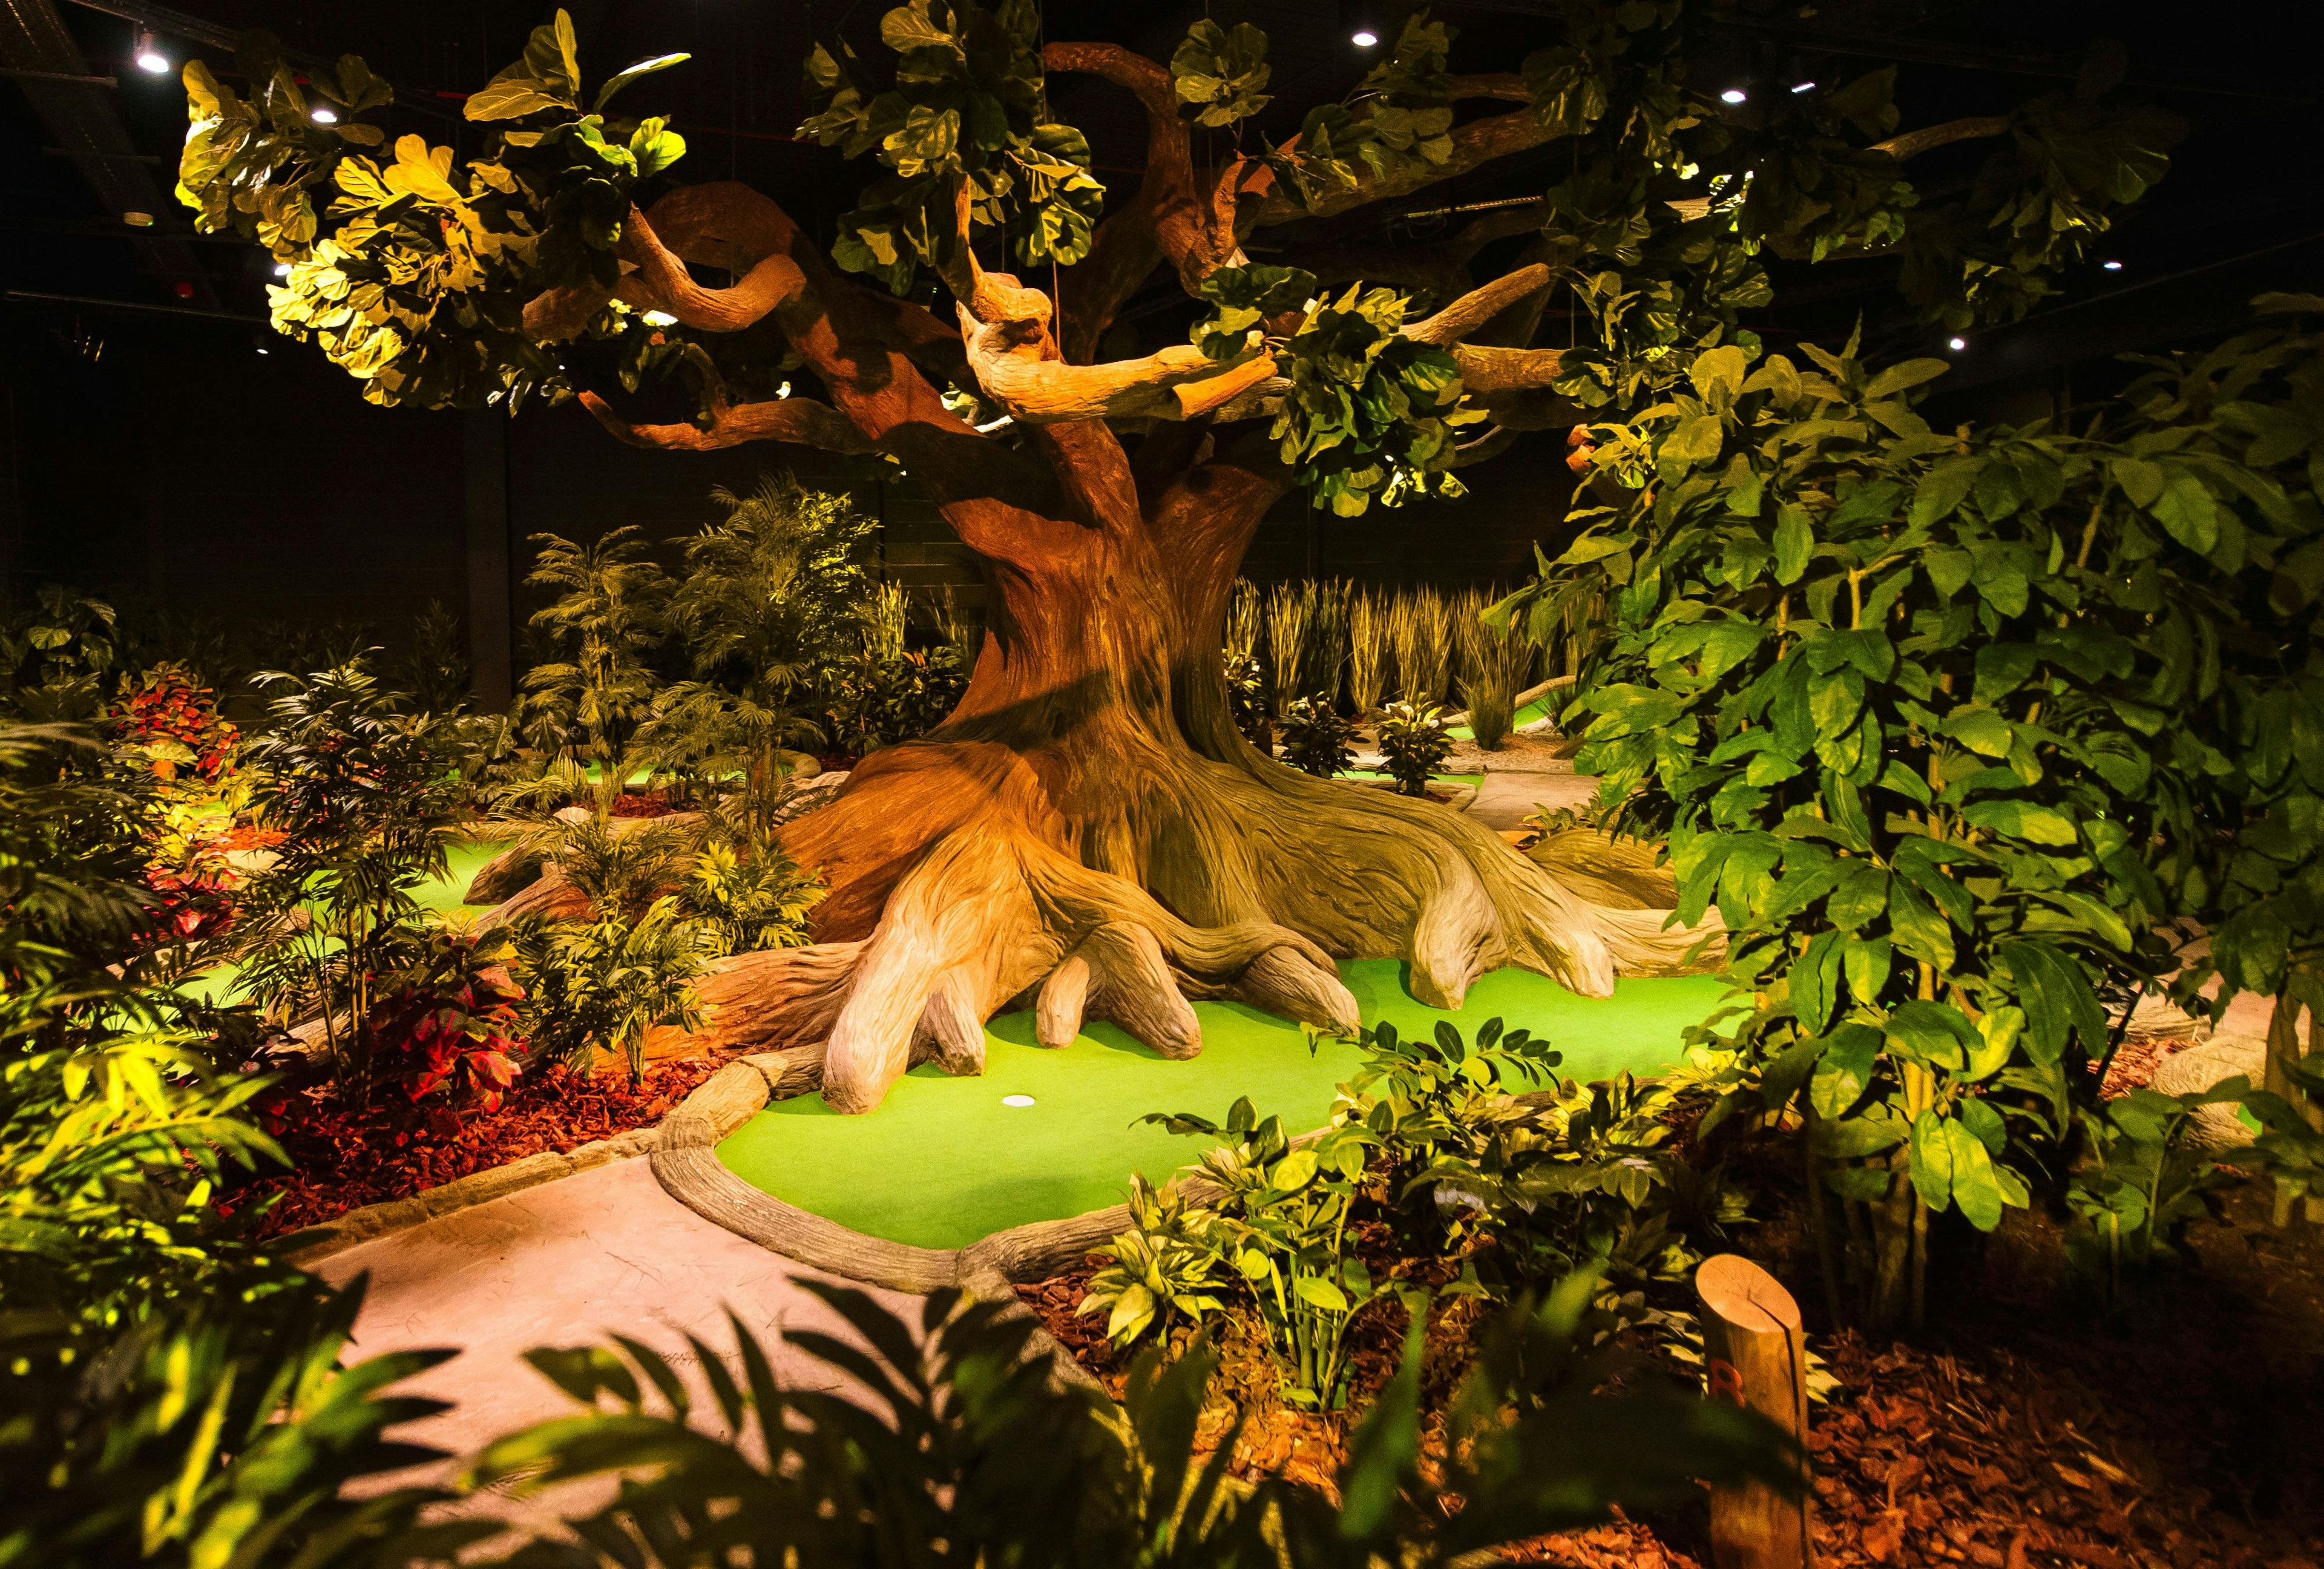 Image of the Mystic Woods hole, with thick jungle foliage and deep roots surrounding the mini golf green.